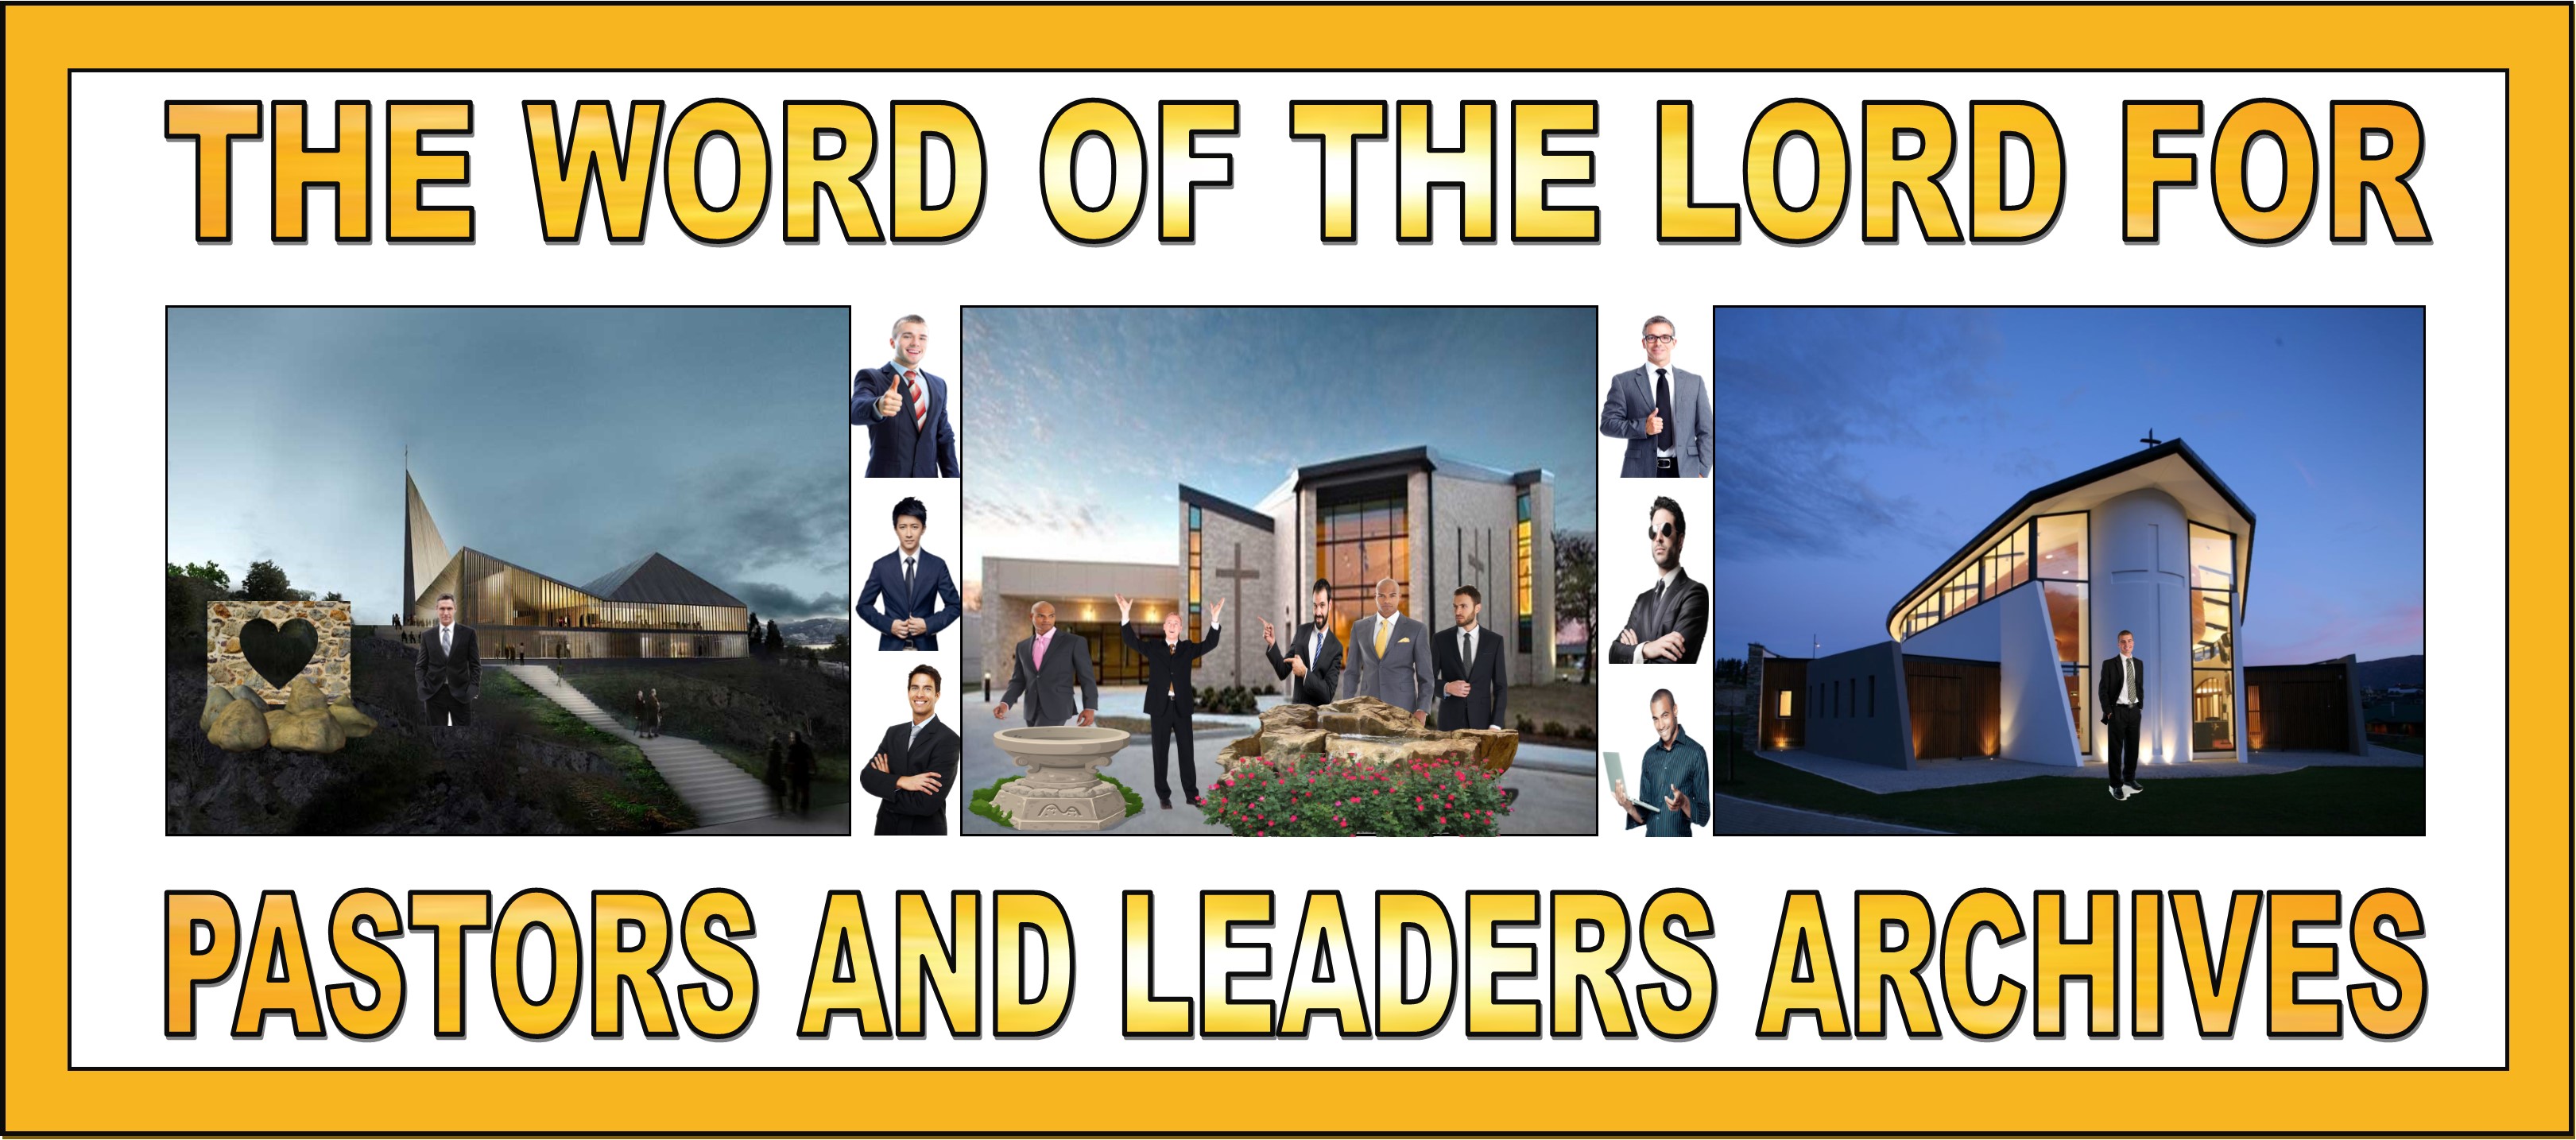 THE_WORD_OF_THE_LORD_FOR_PASTORS_AND_LEADERS_ARCHIVES_CONNECTOR_WEBSITE_HEADER_FOR_ALL_ARCHIVES_1-1-2020